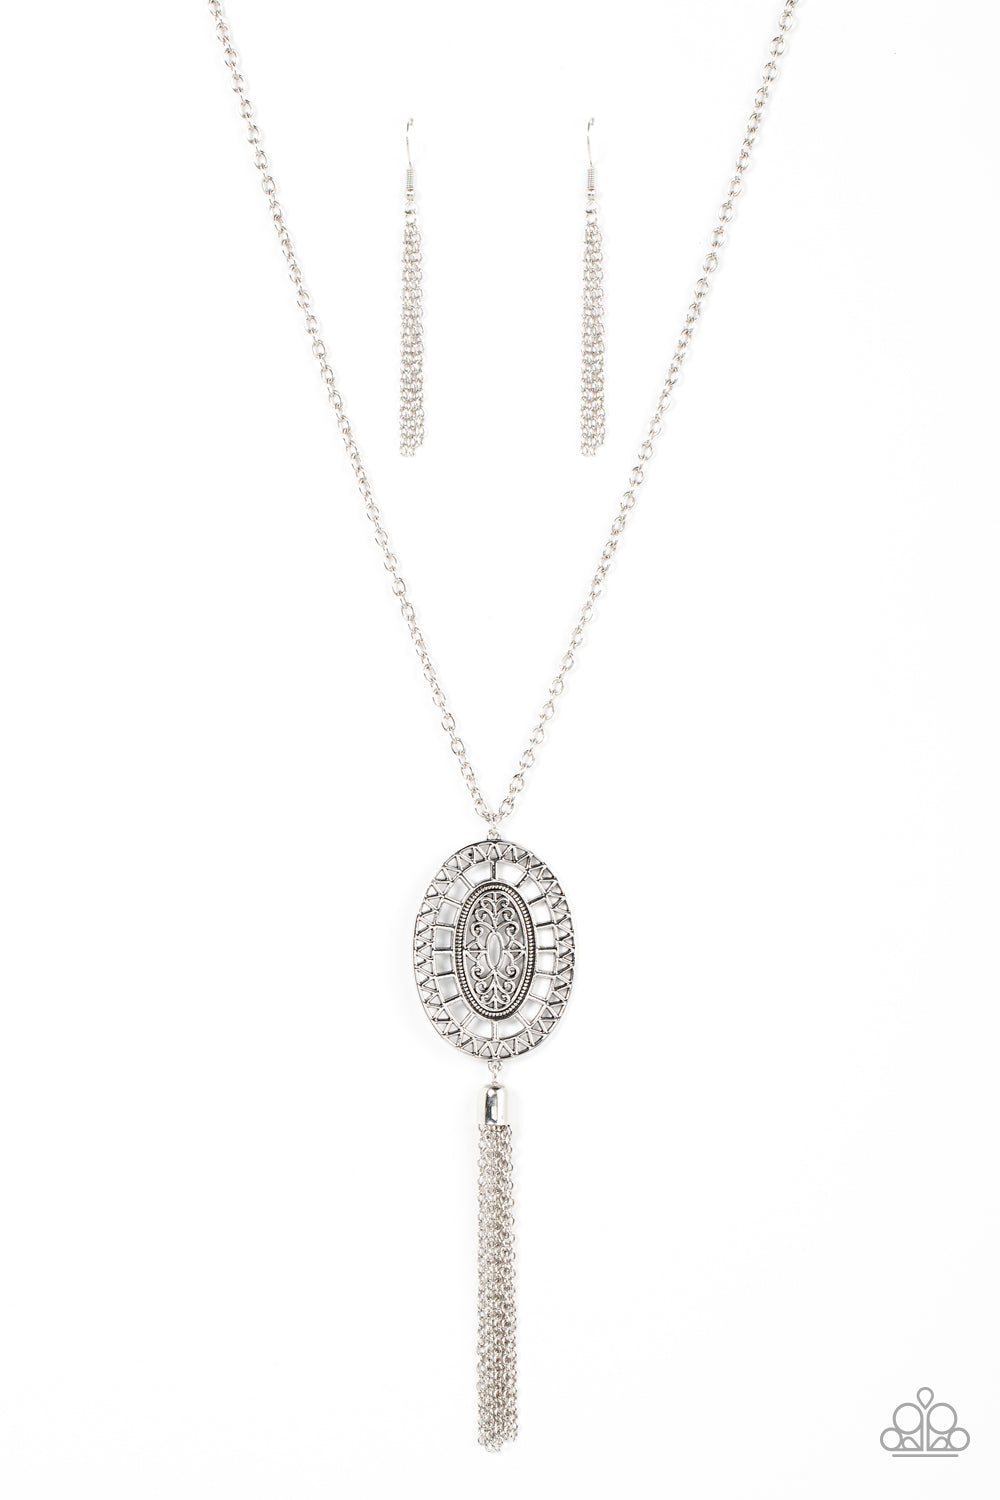 Paparazzi - Whimsically Wistful - Silver Necklace